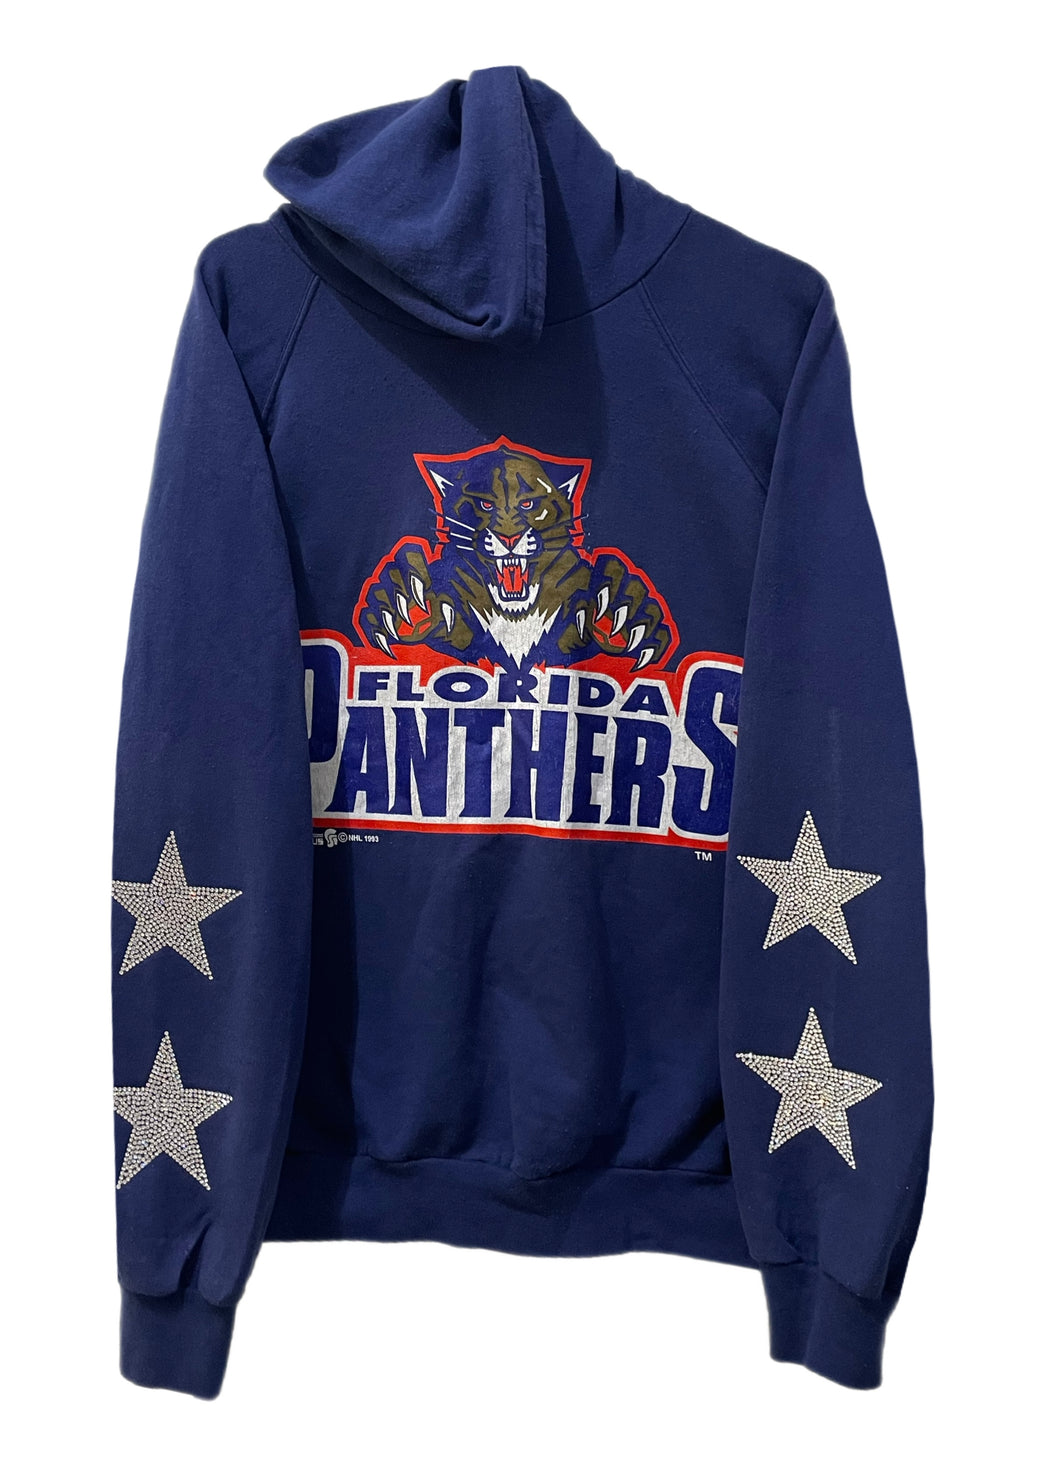 Florida Panthers, NHL One of a KIND Vintage Hoodie with Crystal Star Design